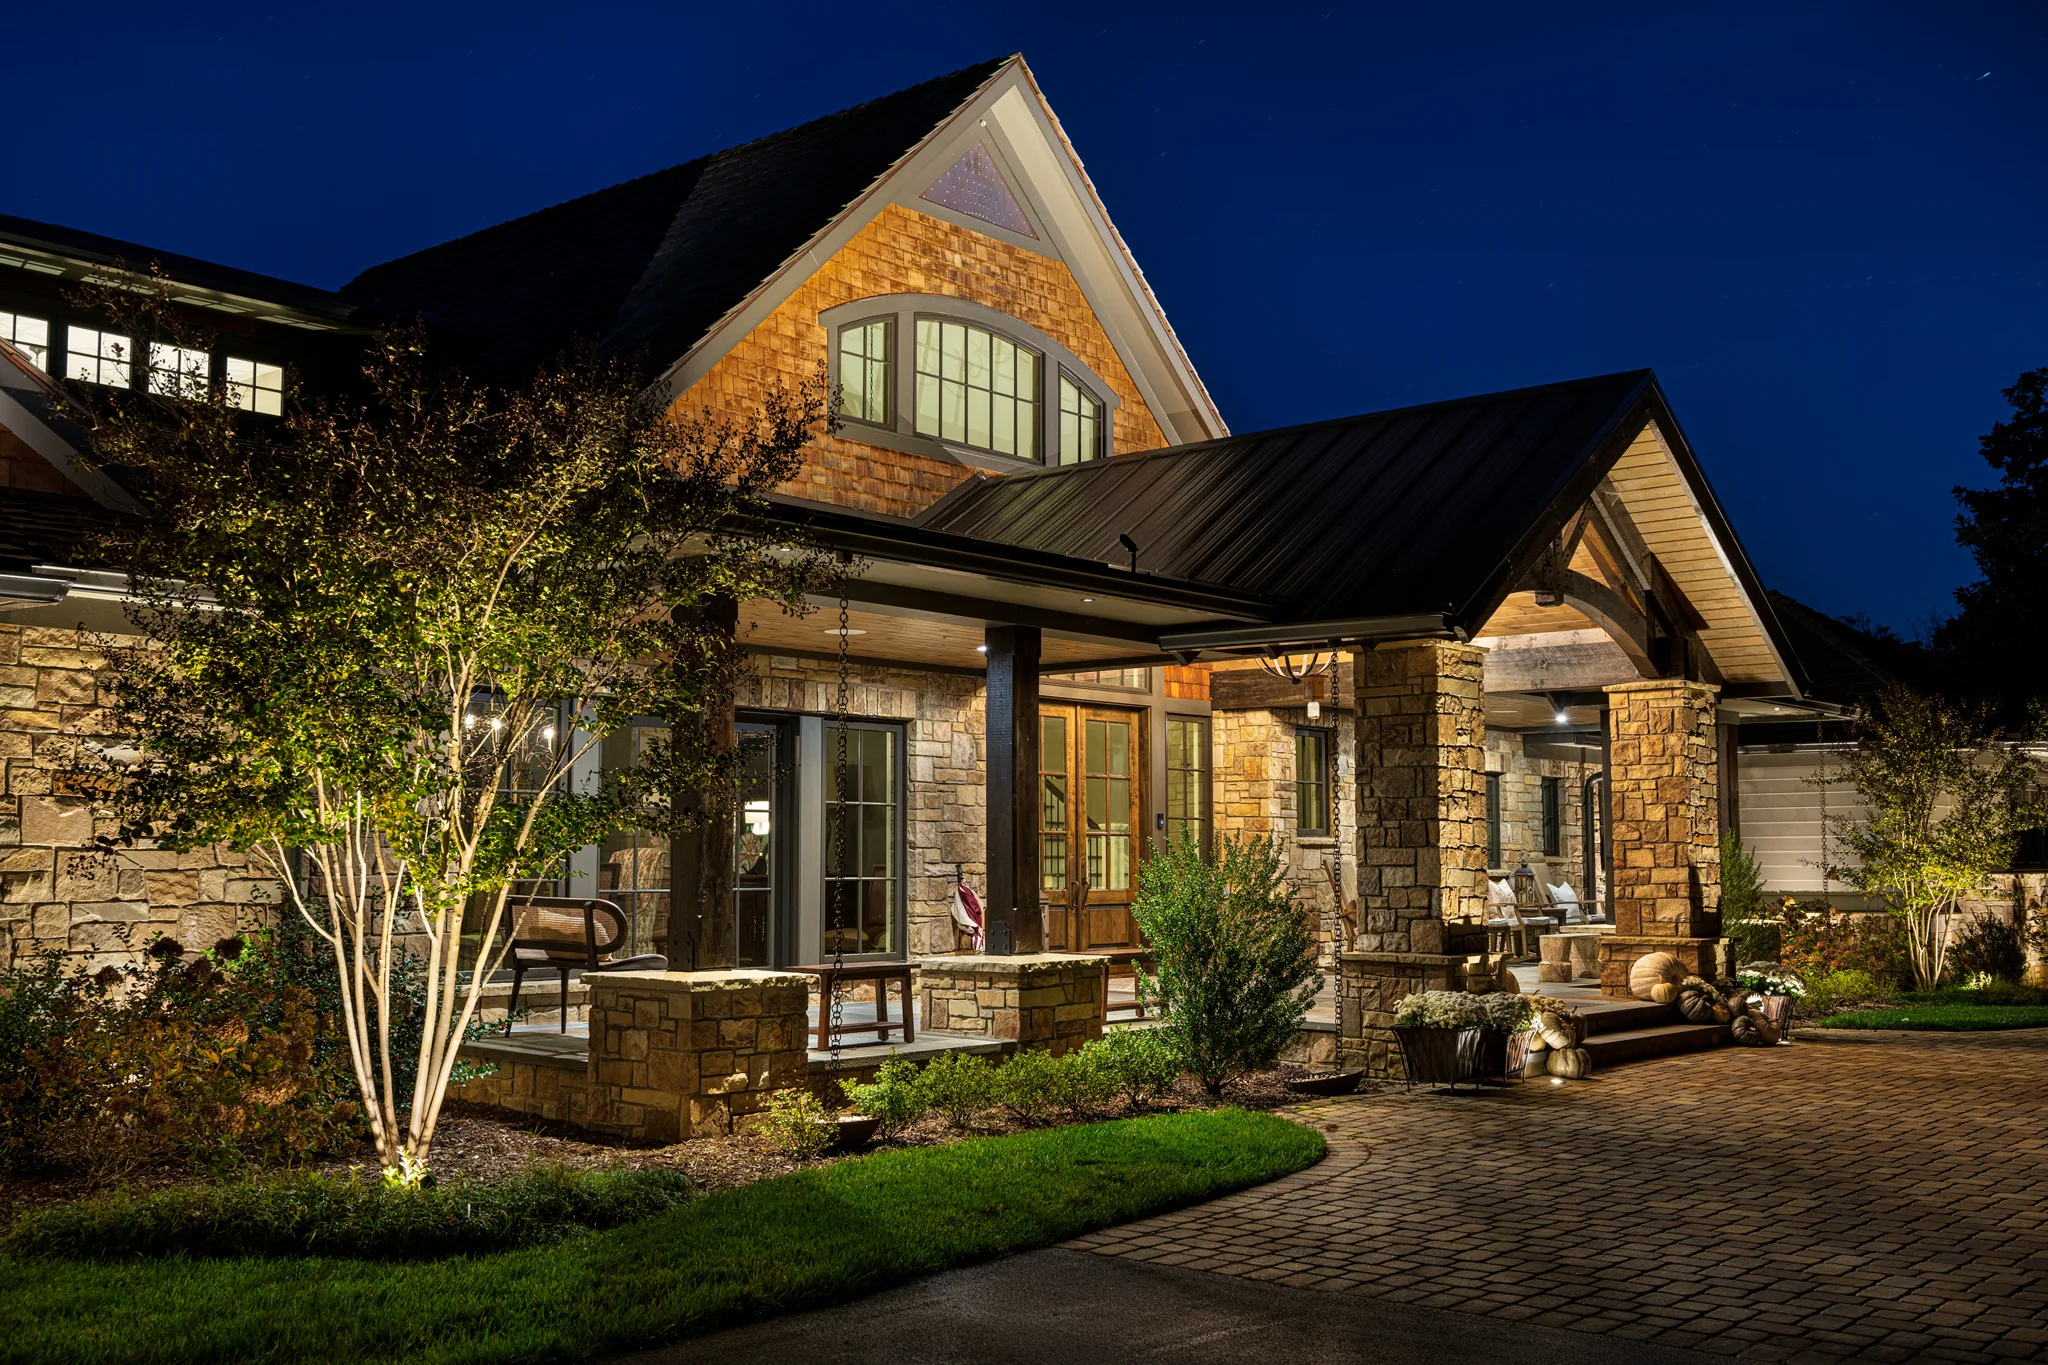 SAFE AND STUNNING OUTDOOR LIGHTING SYSTEMS IN OAK HILL, TN